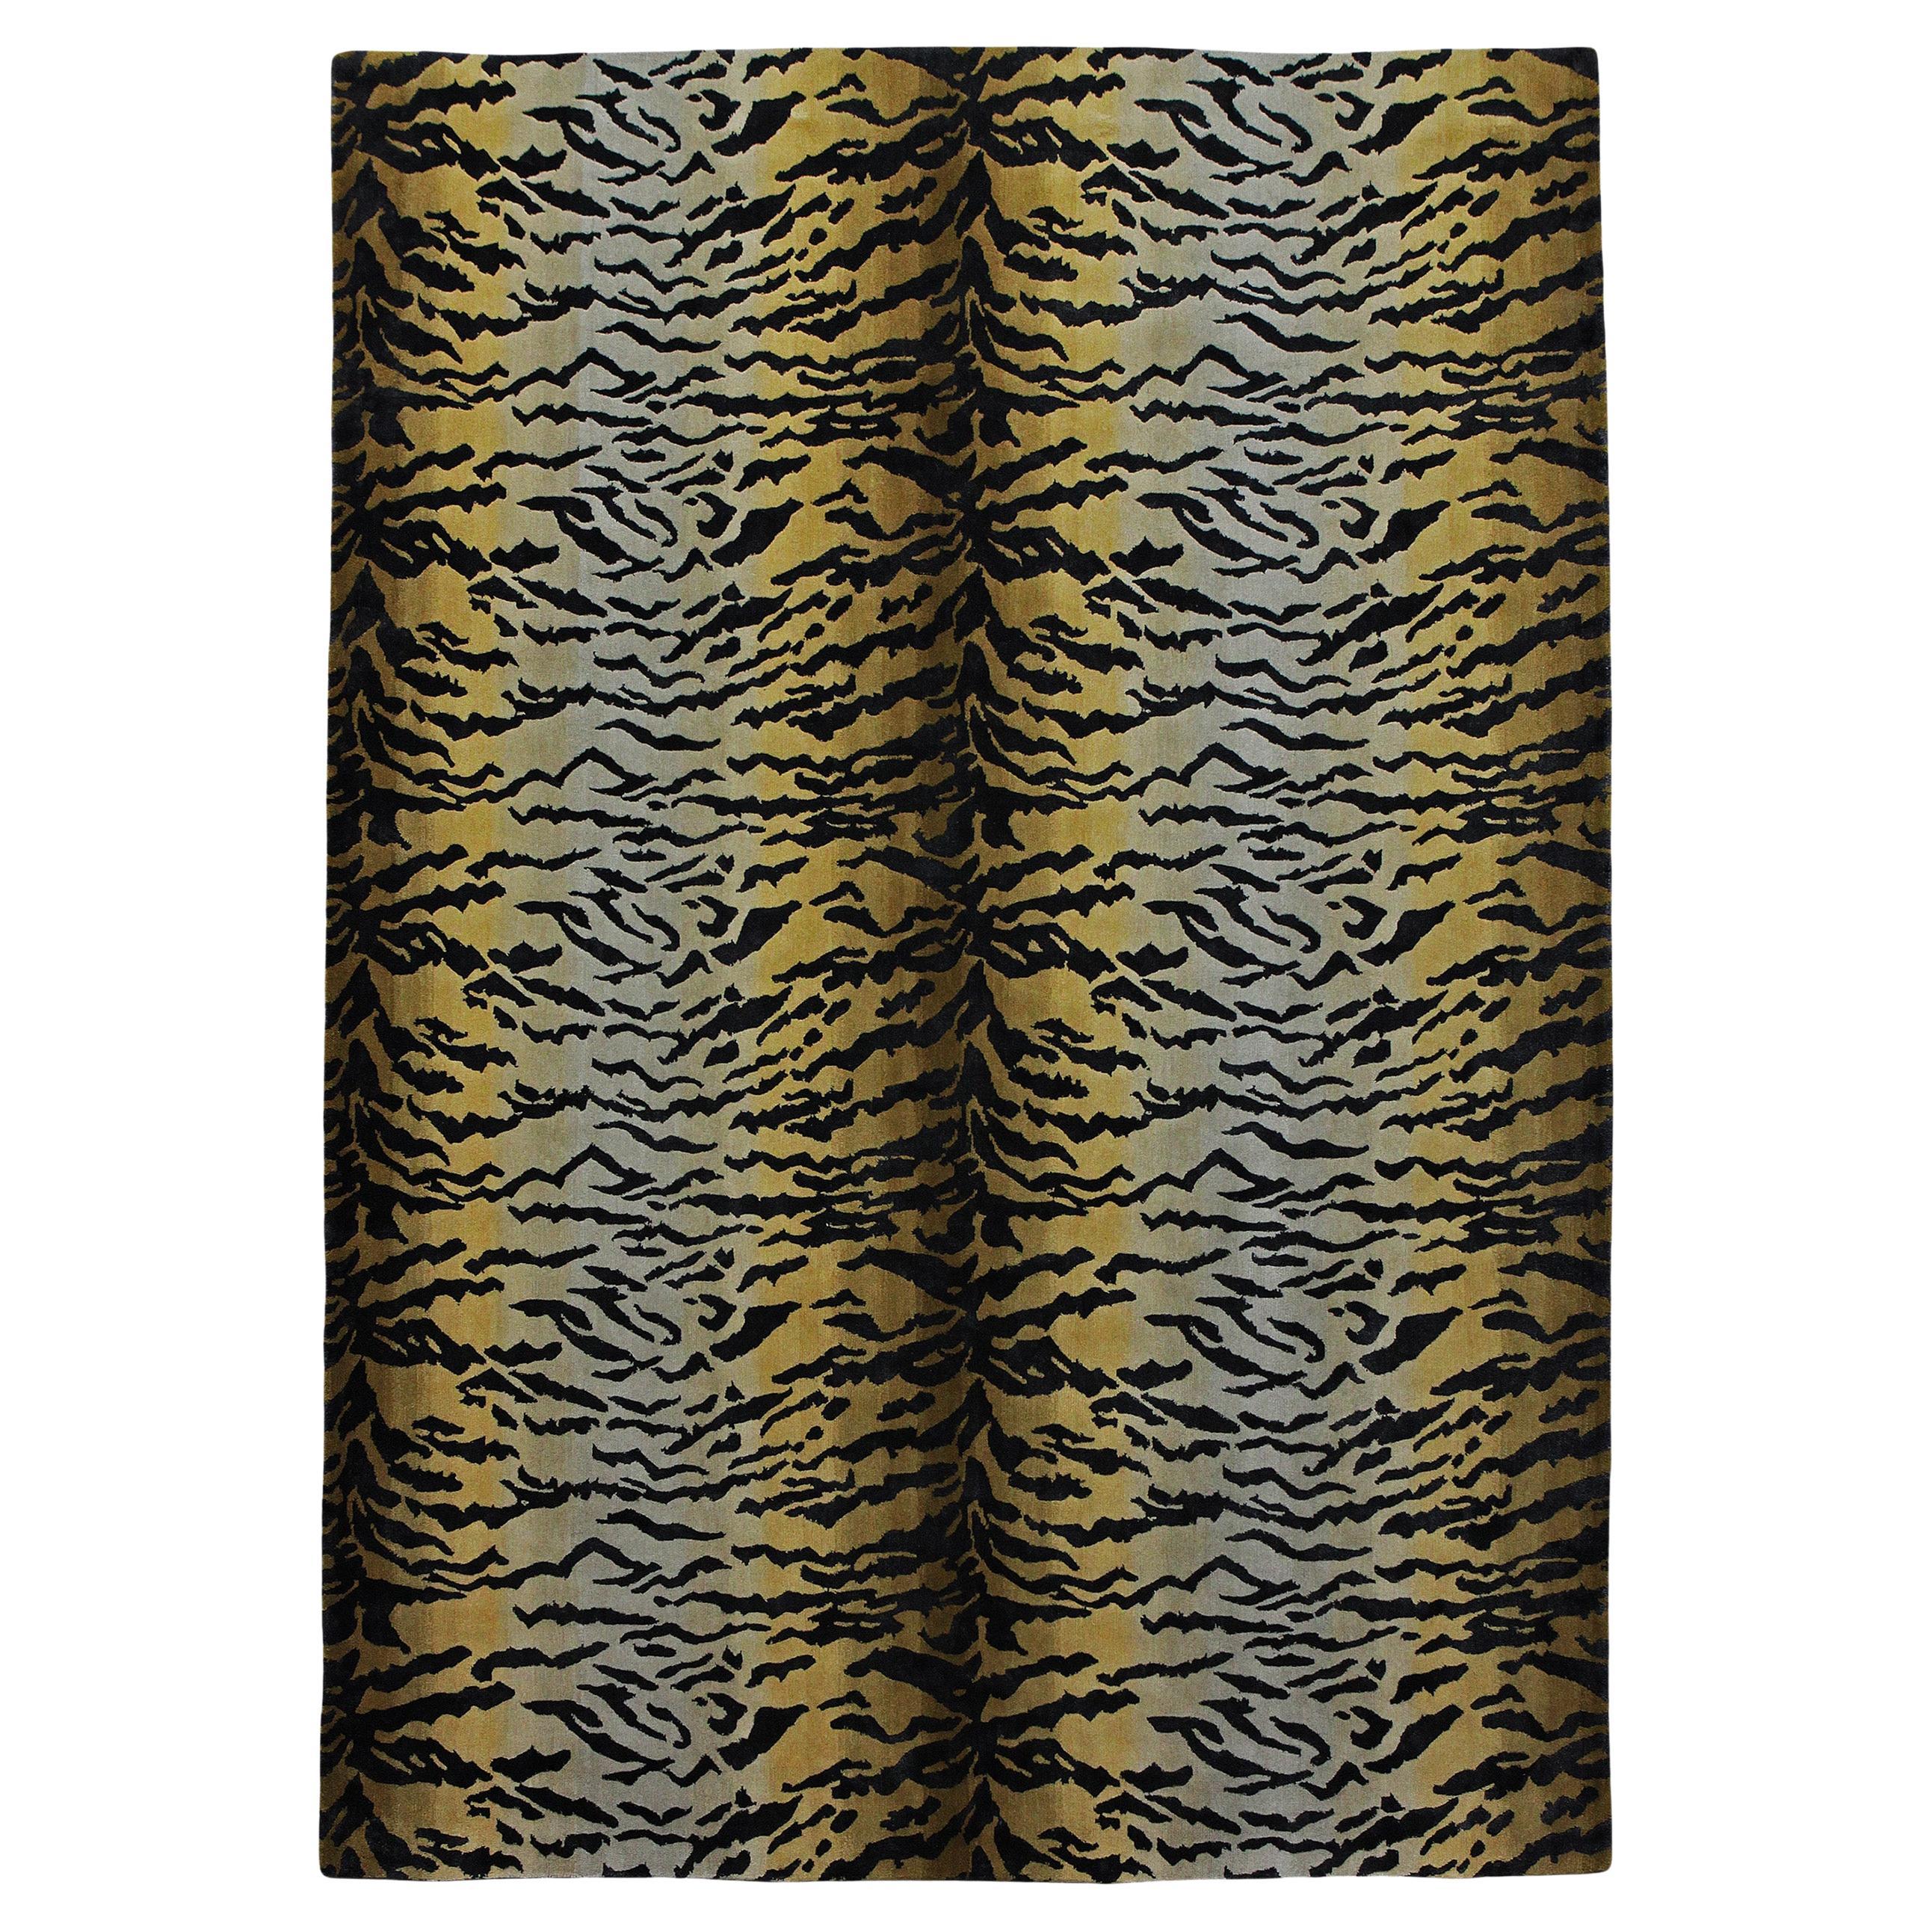 Luxury Modern Hand-Knotted Adaptations Panthera Tiger 12x16 Rug